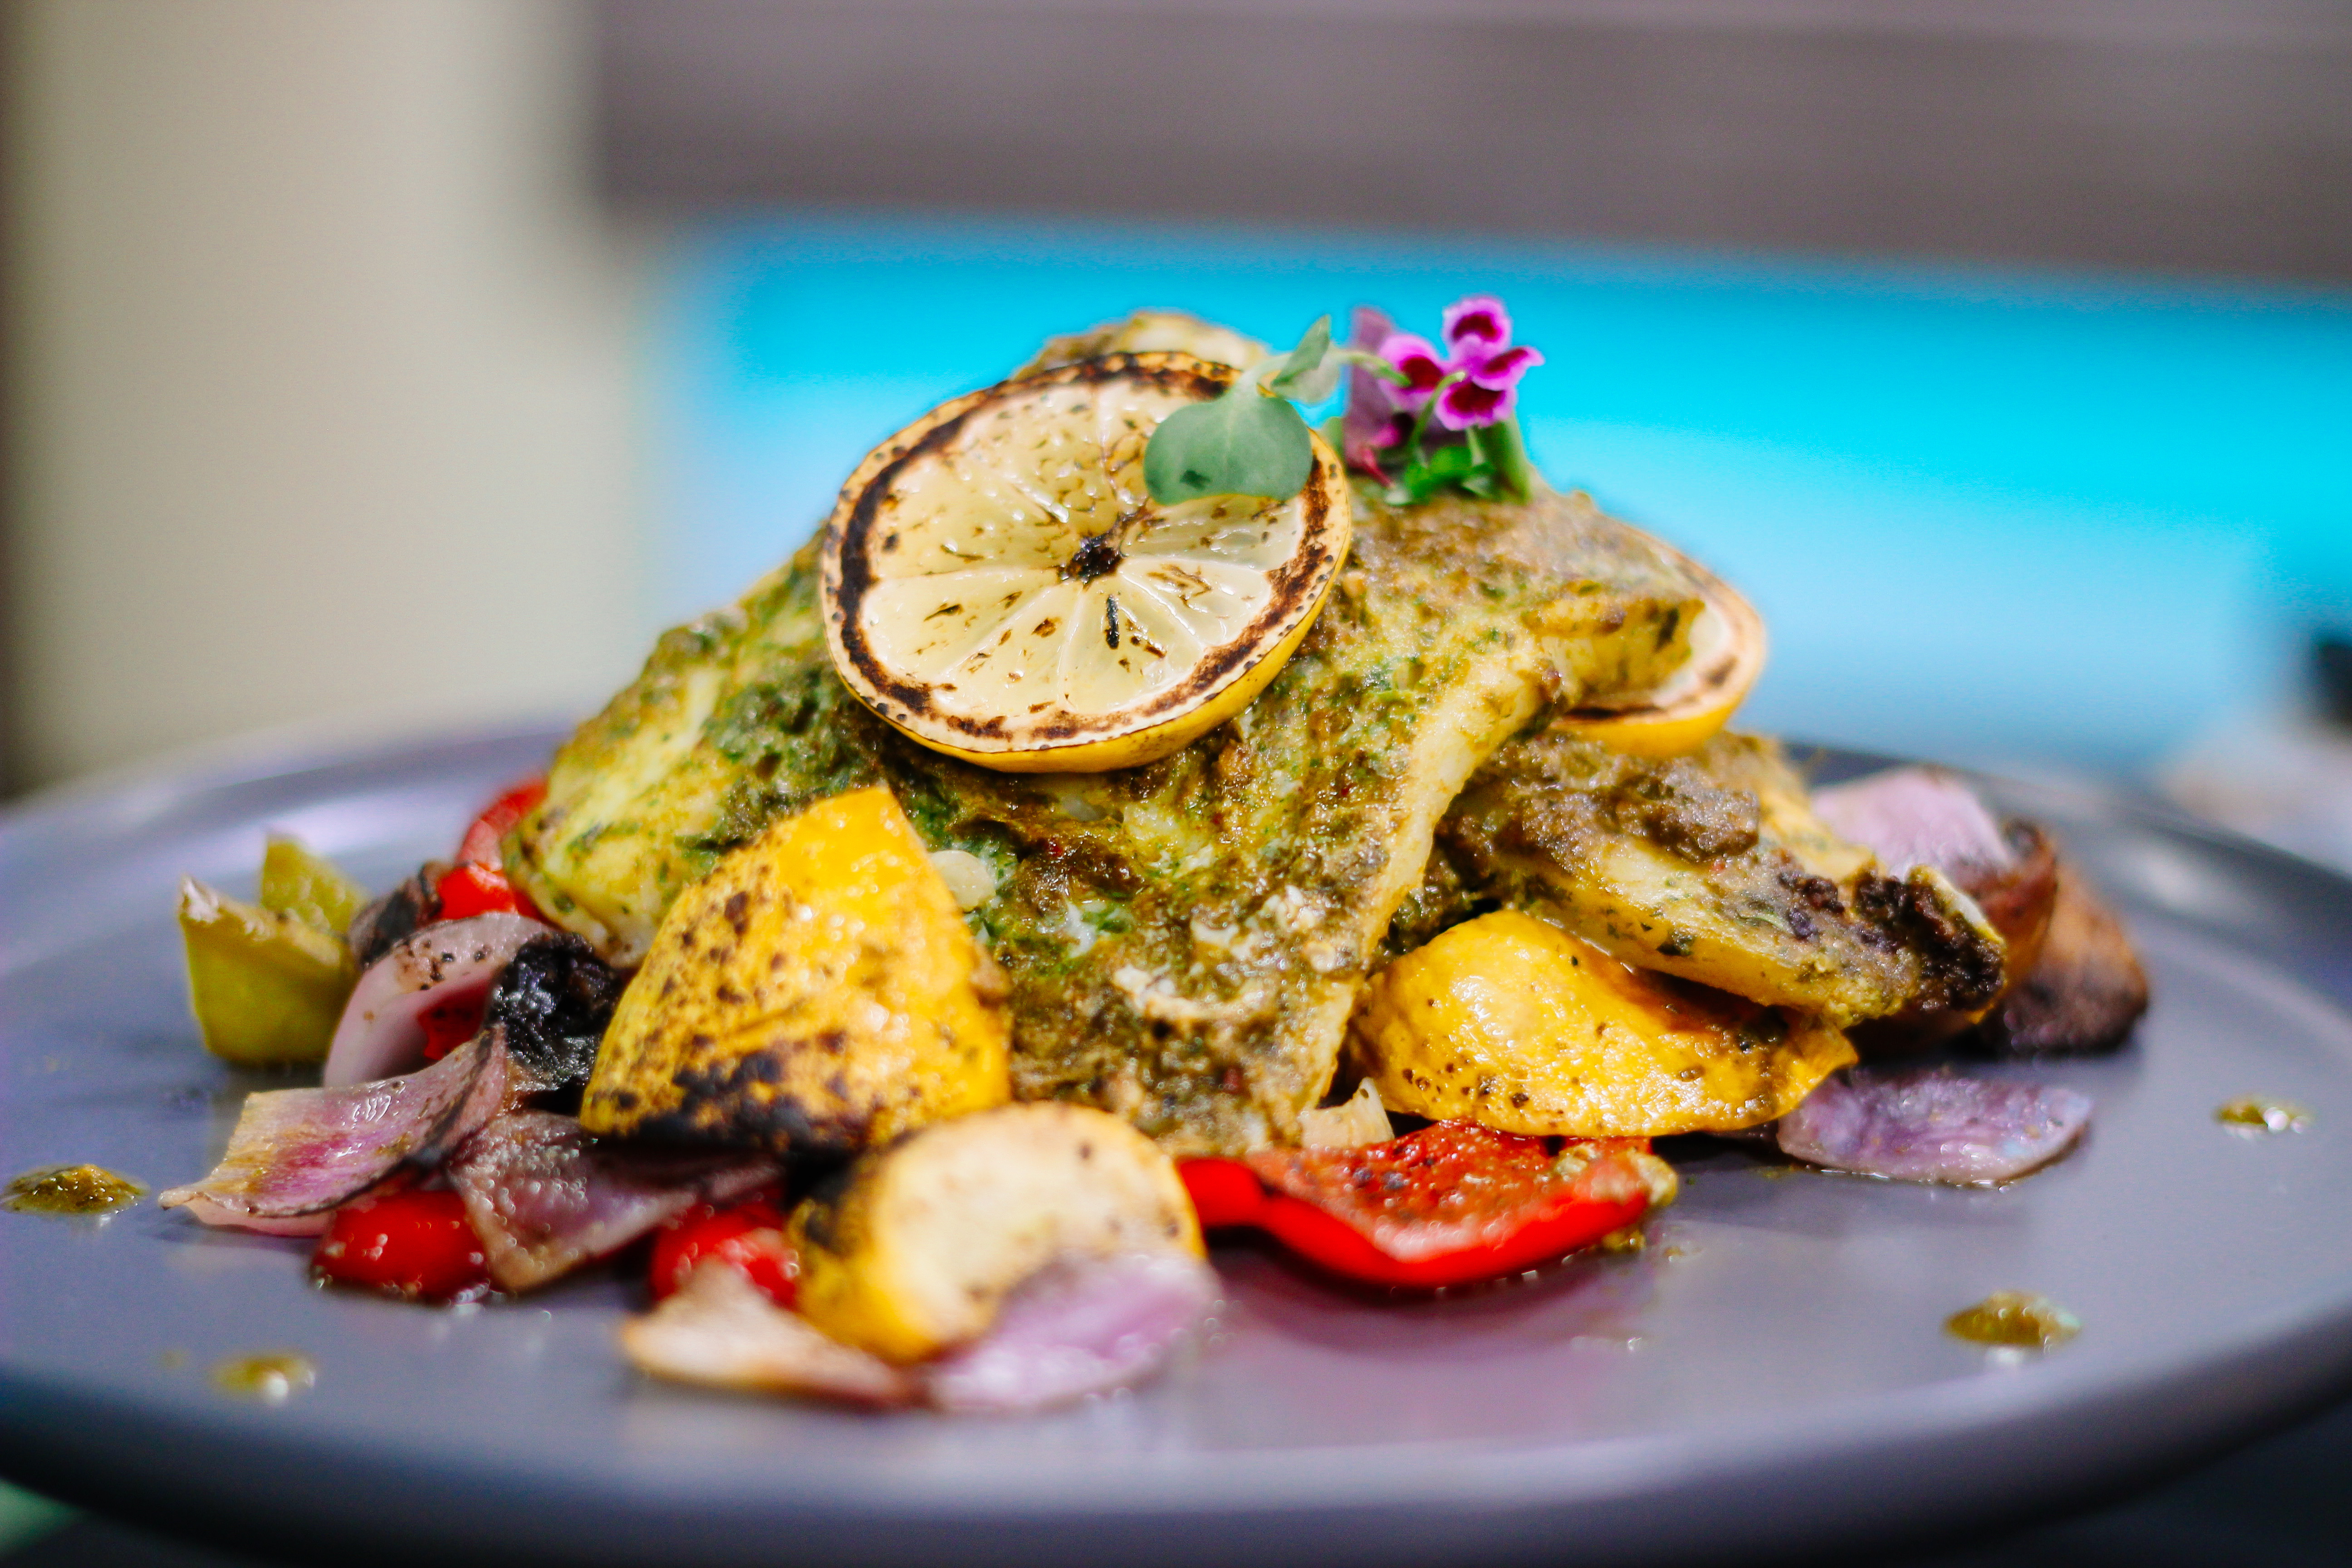 International Dishes by Chef Serge: Baked Cod with Chermoula Sauce Recipe